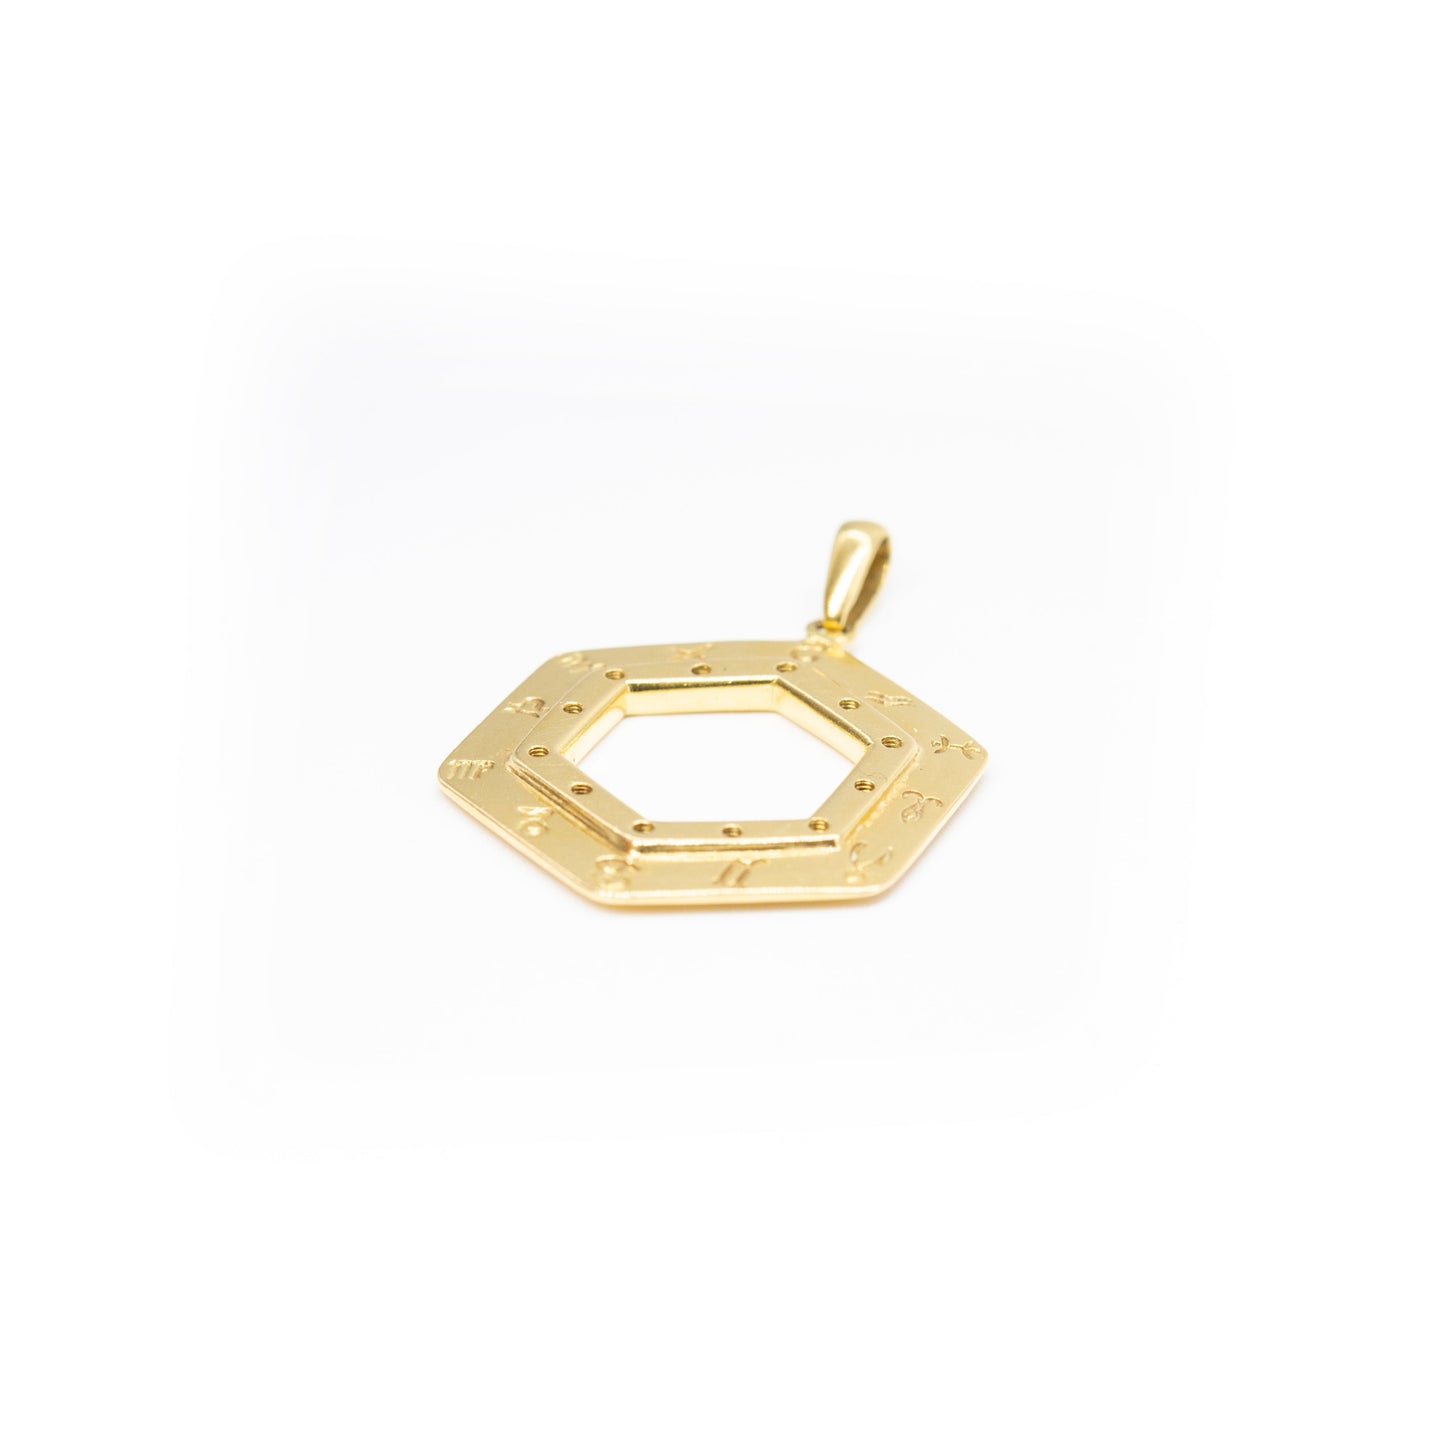 Vintage Yellow Gold Pendant For Women | Celeste | Vintage Jewelry | Pre-owned jewelry | Lil Milan